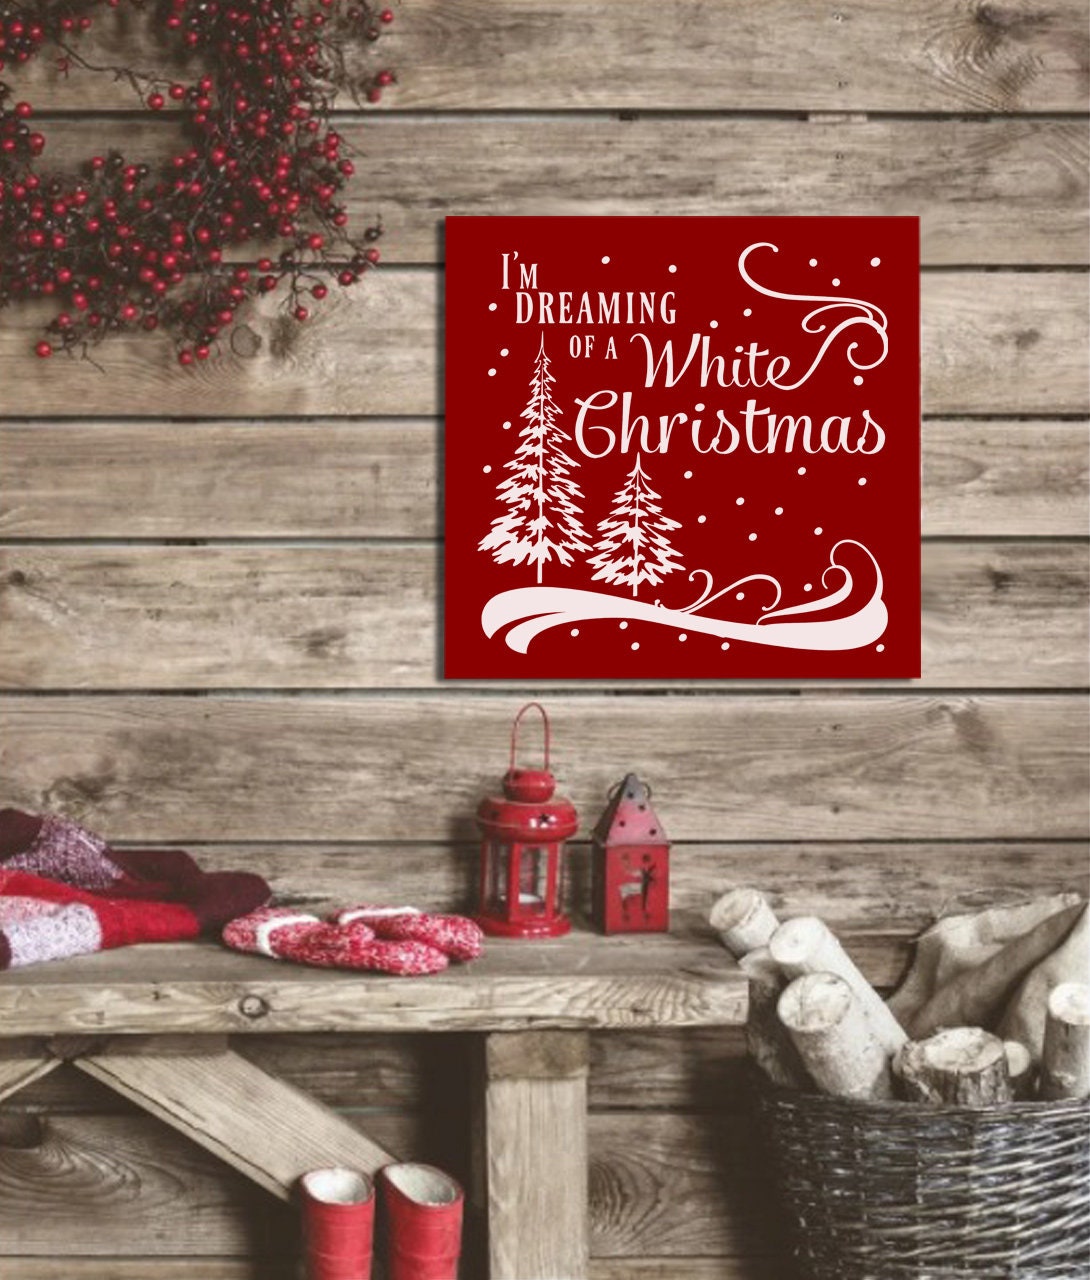 I'm Dreaming of White Christmas Décor - All About Interiors